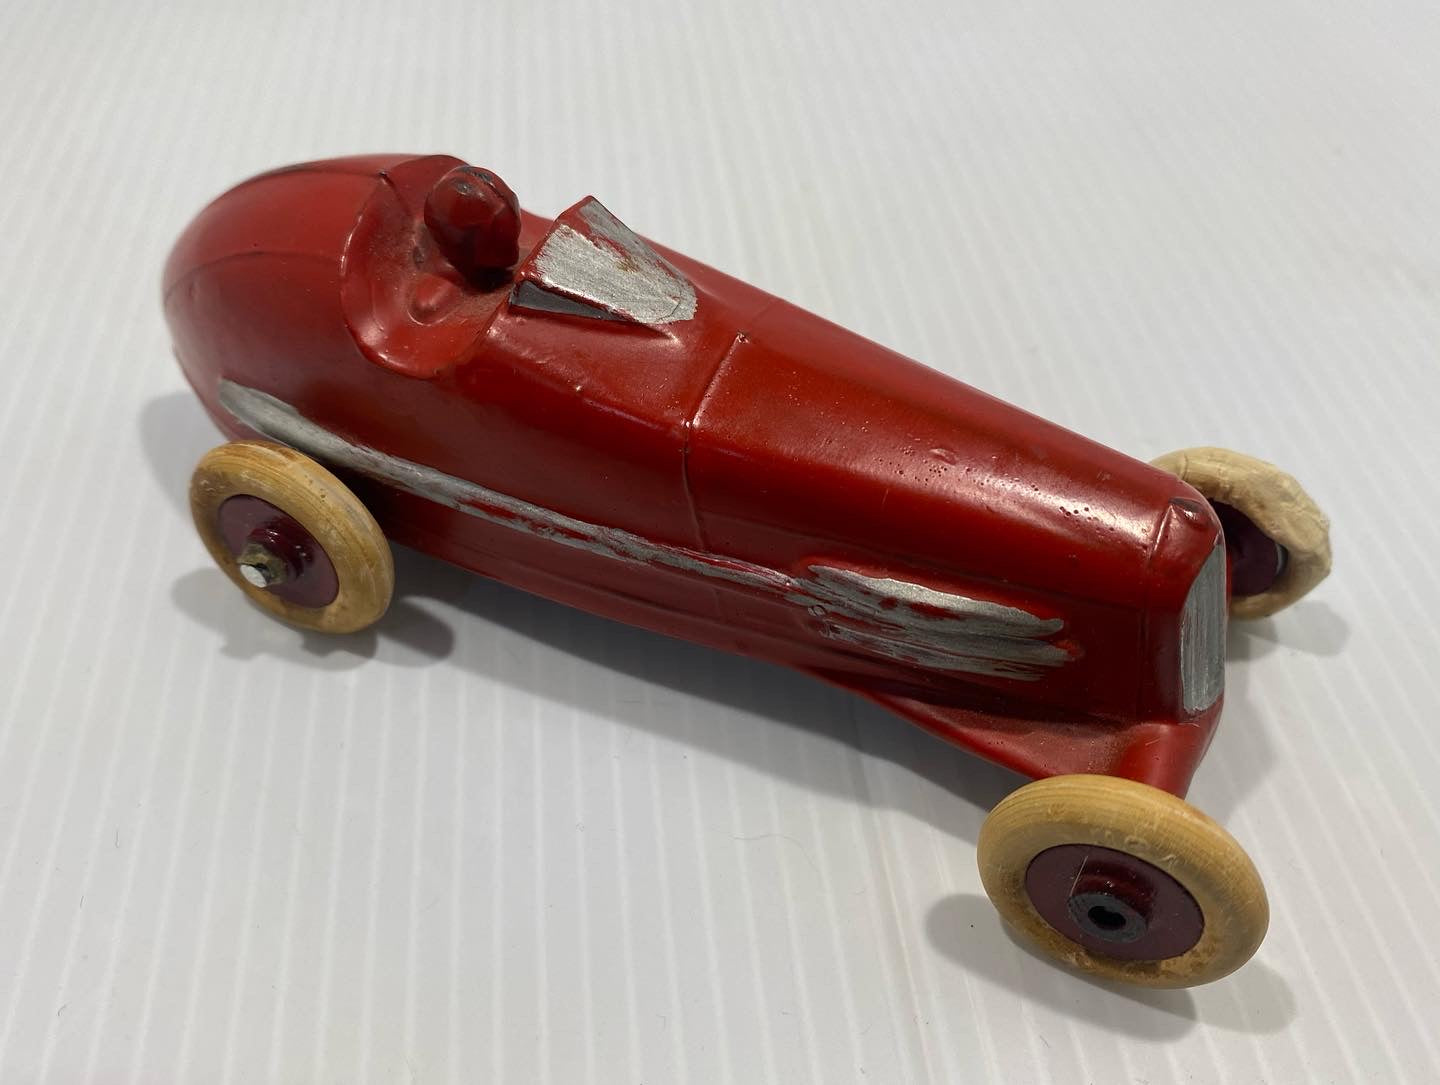 Rare Antique Savoye Pewter Toy Company boat-tail racer with driver , all original. Made in USA 1930's.